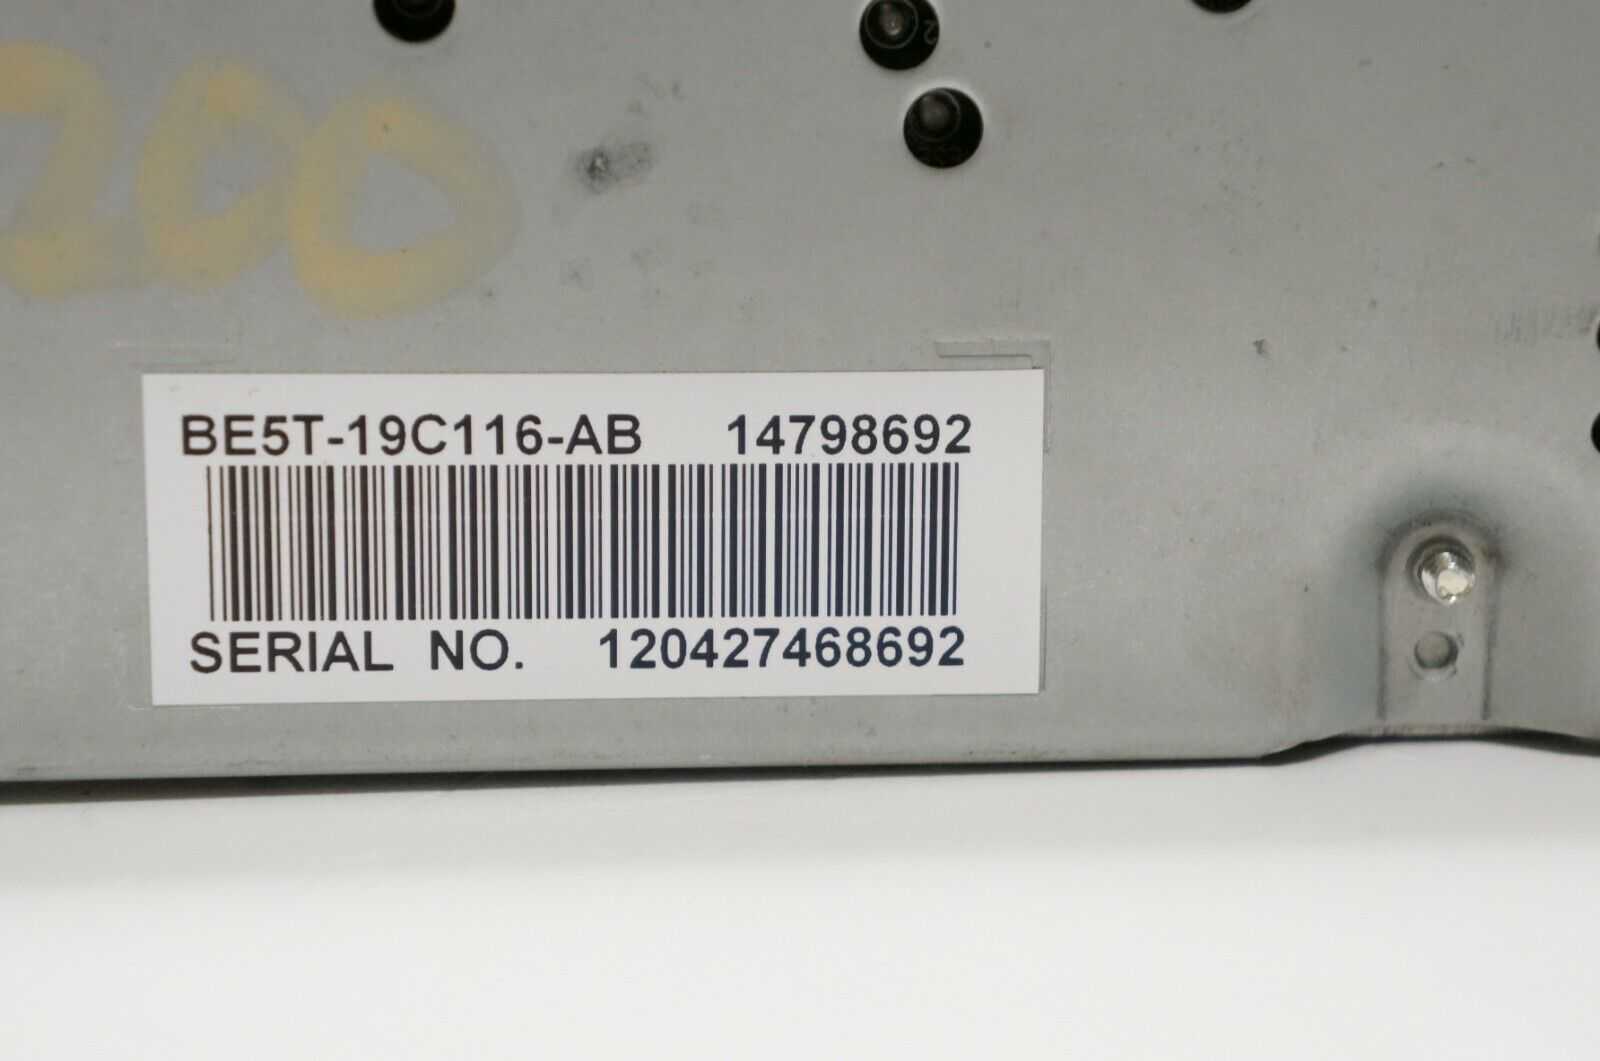 *READ* 2011-2012 Ford Fusion Information Display Screen ID BE5T-19C116-AB OEM Alshned Auto Parts